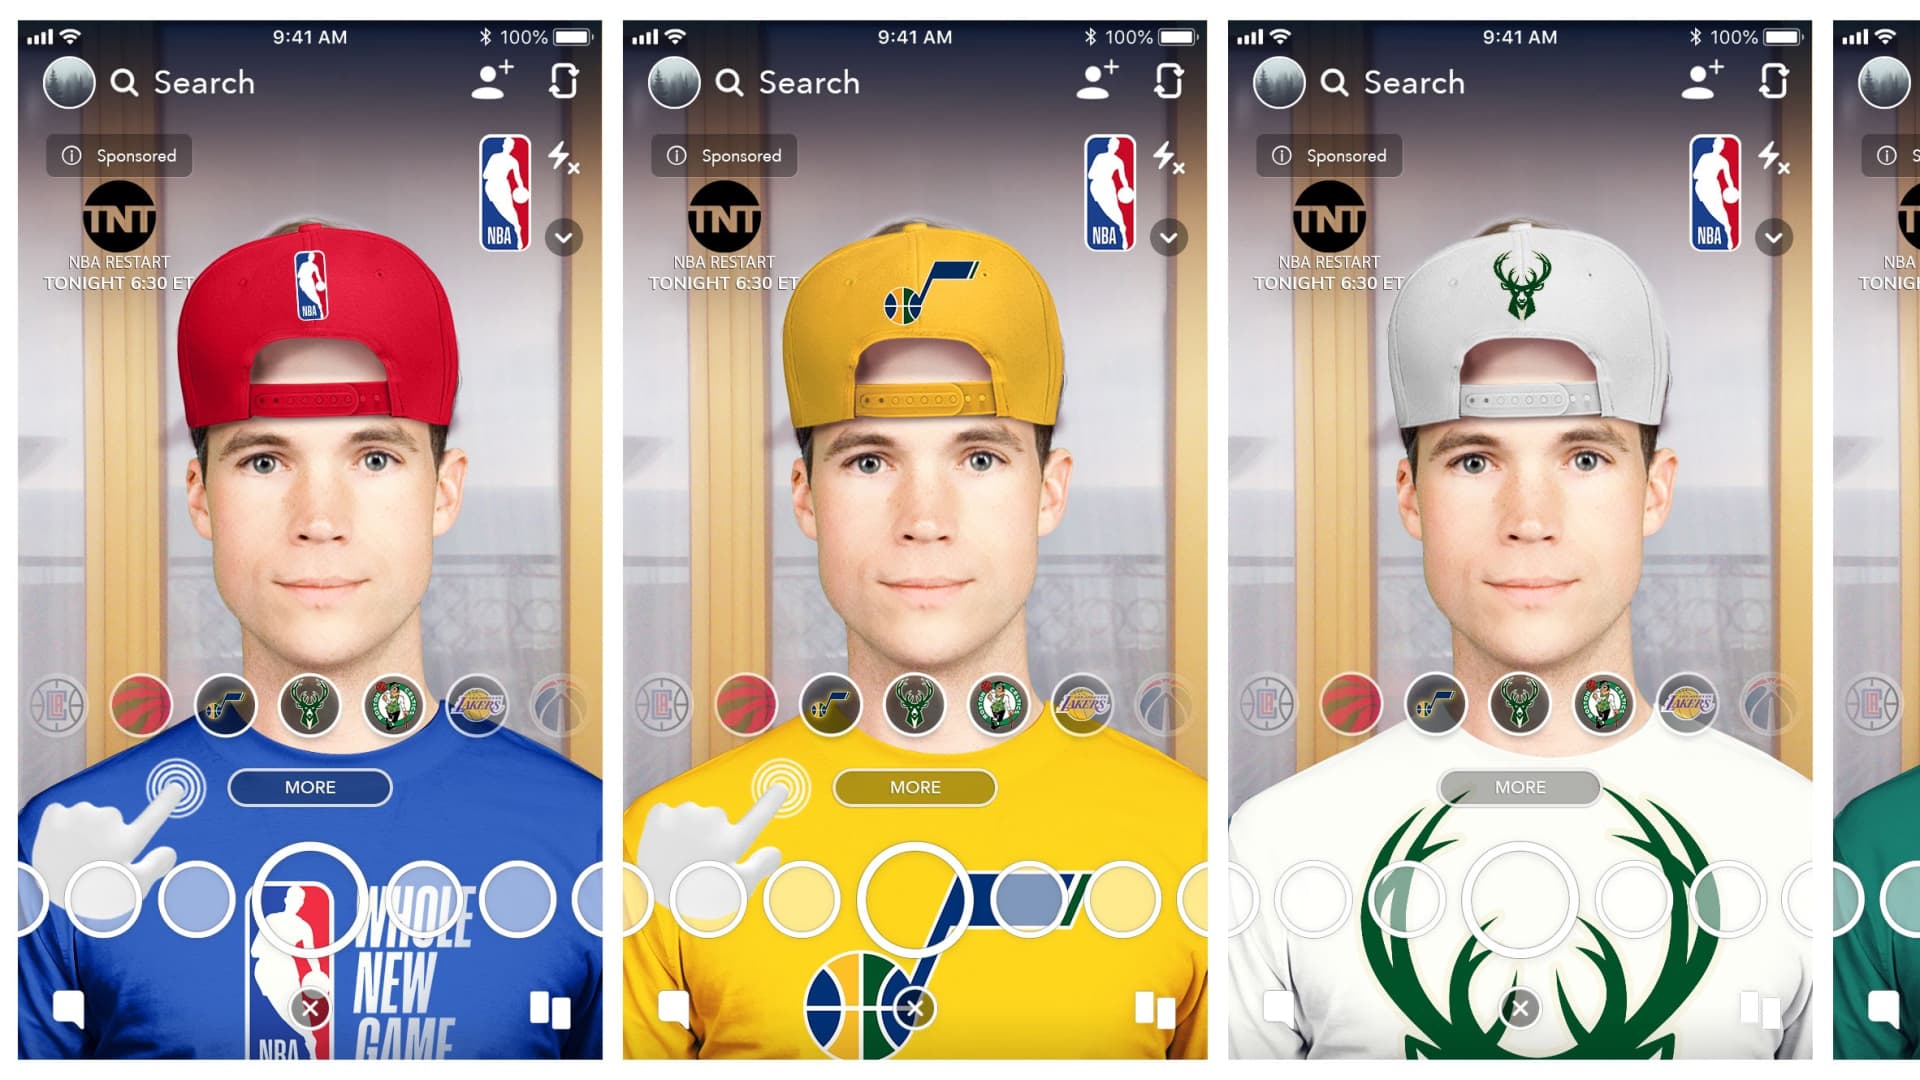 Snapchat partners with the NBA with Snapchat-NBA augmented reality features.